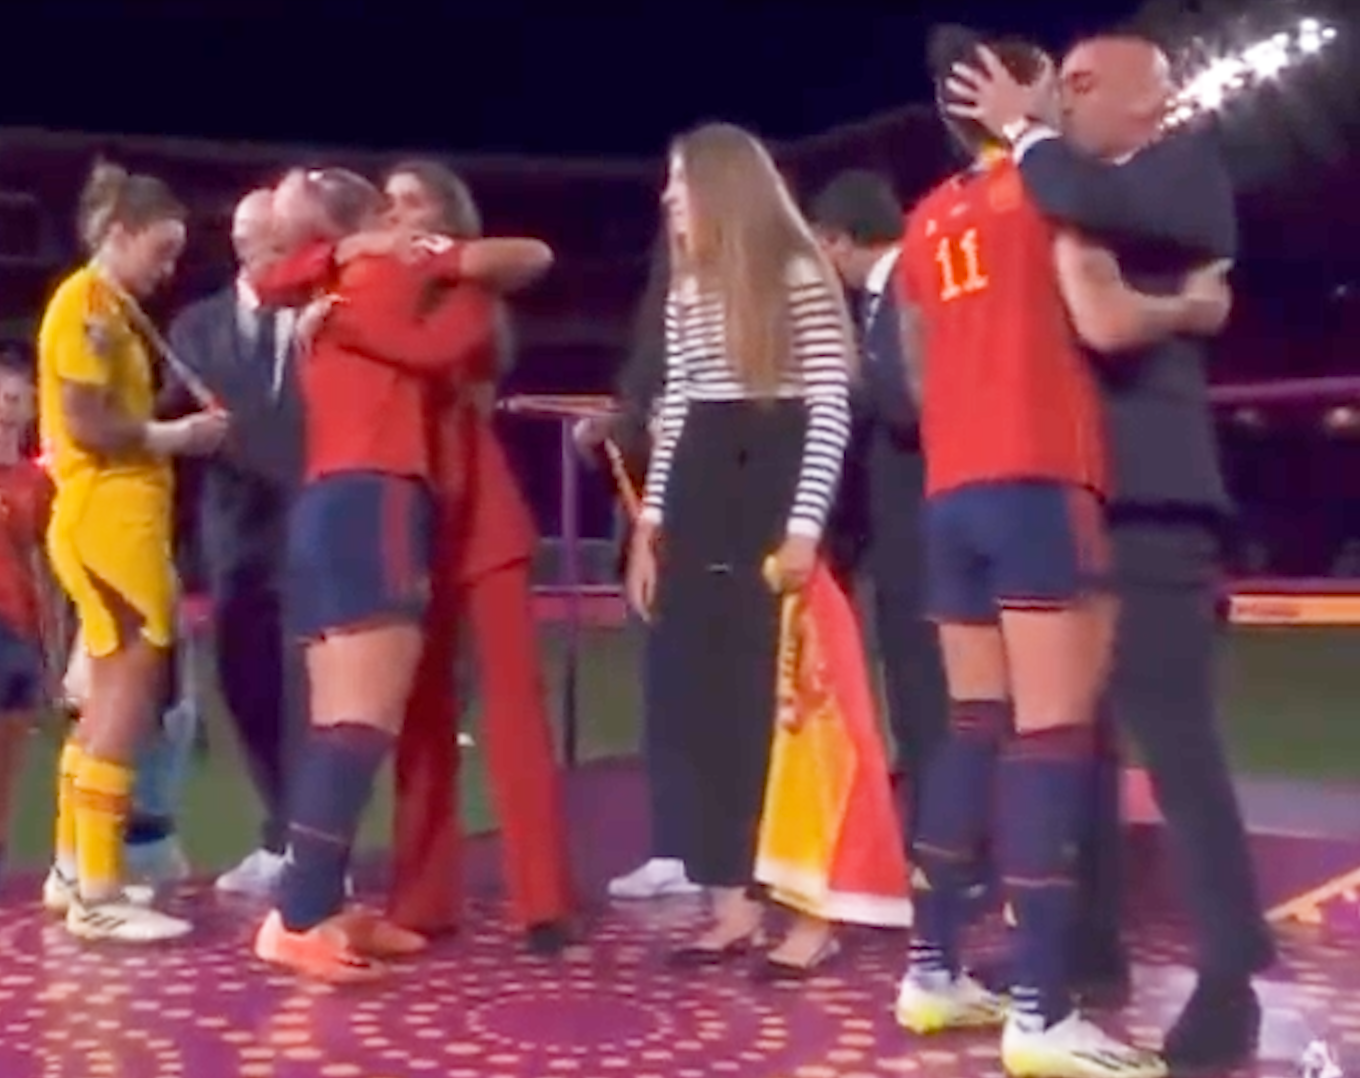 Spain’s Football President Has Finally Resigned After He Forcibly Kissed A Woman Player On The Lips